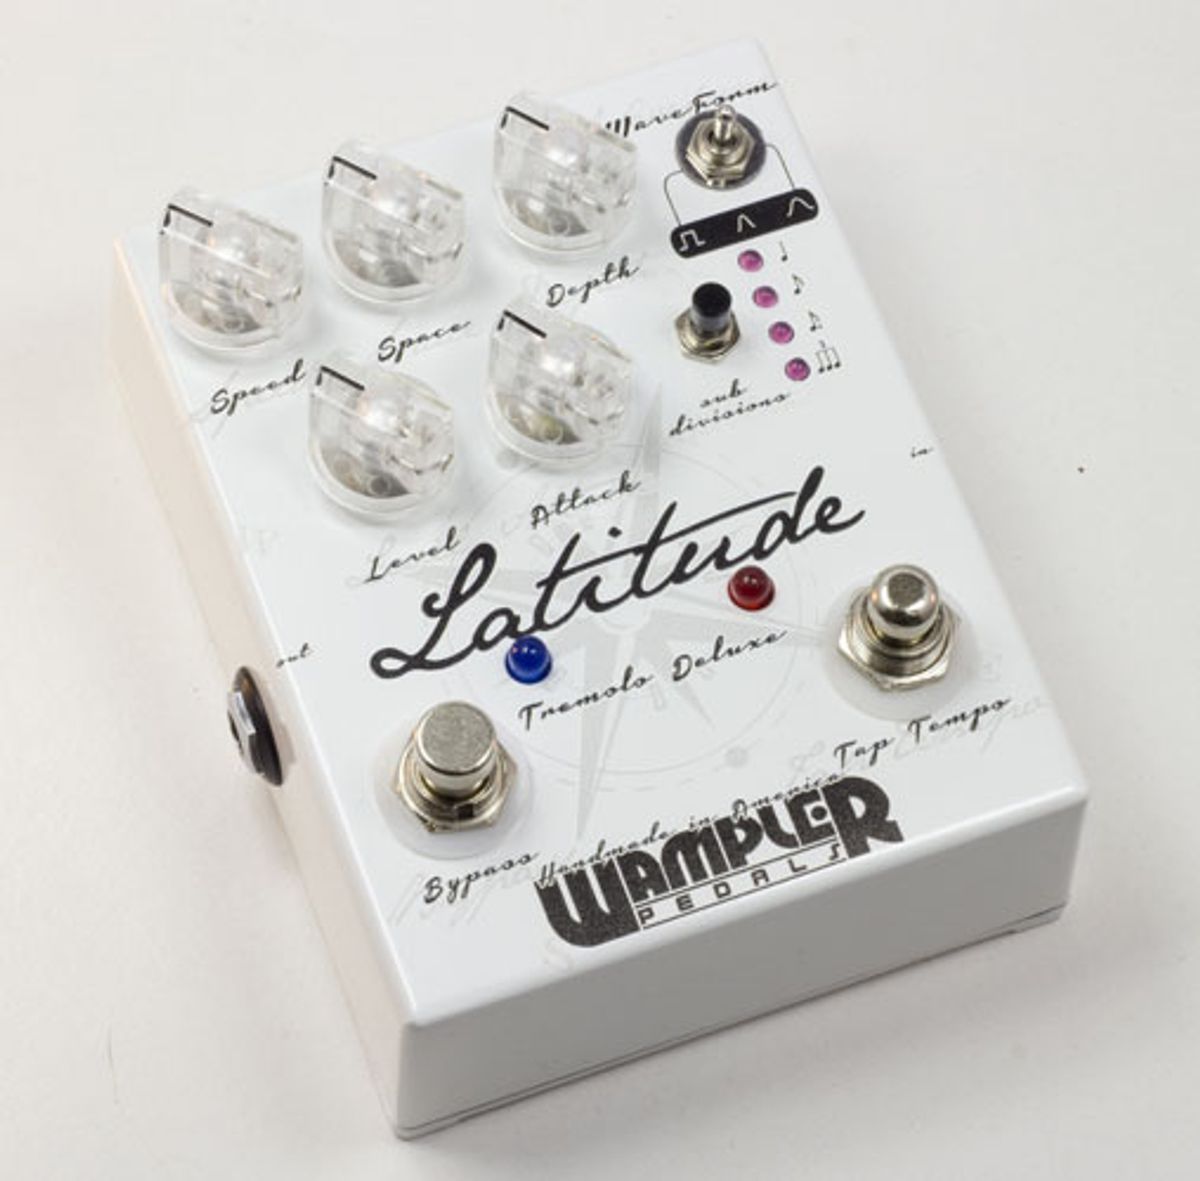 Wampler Pedals Introduces the Latitude Deluxe Tremolo